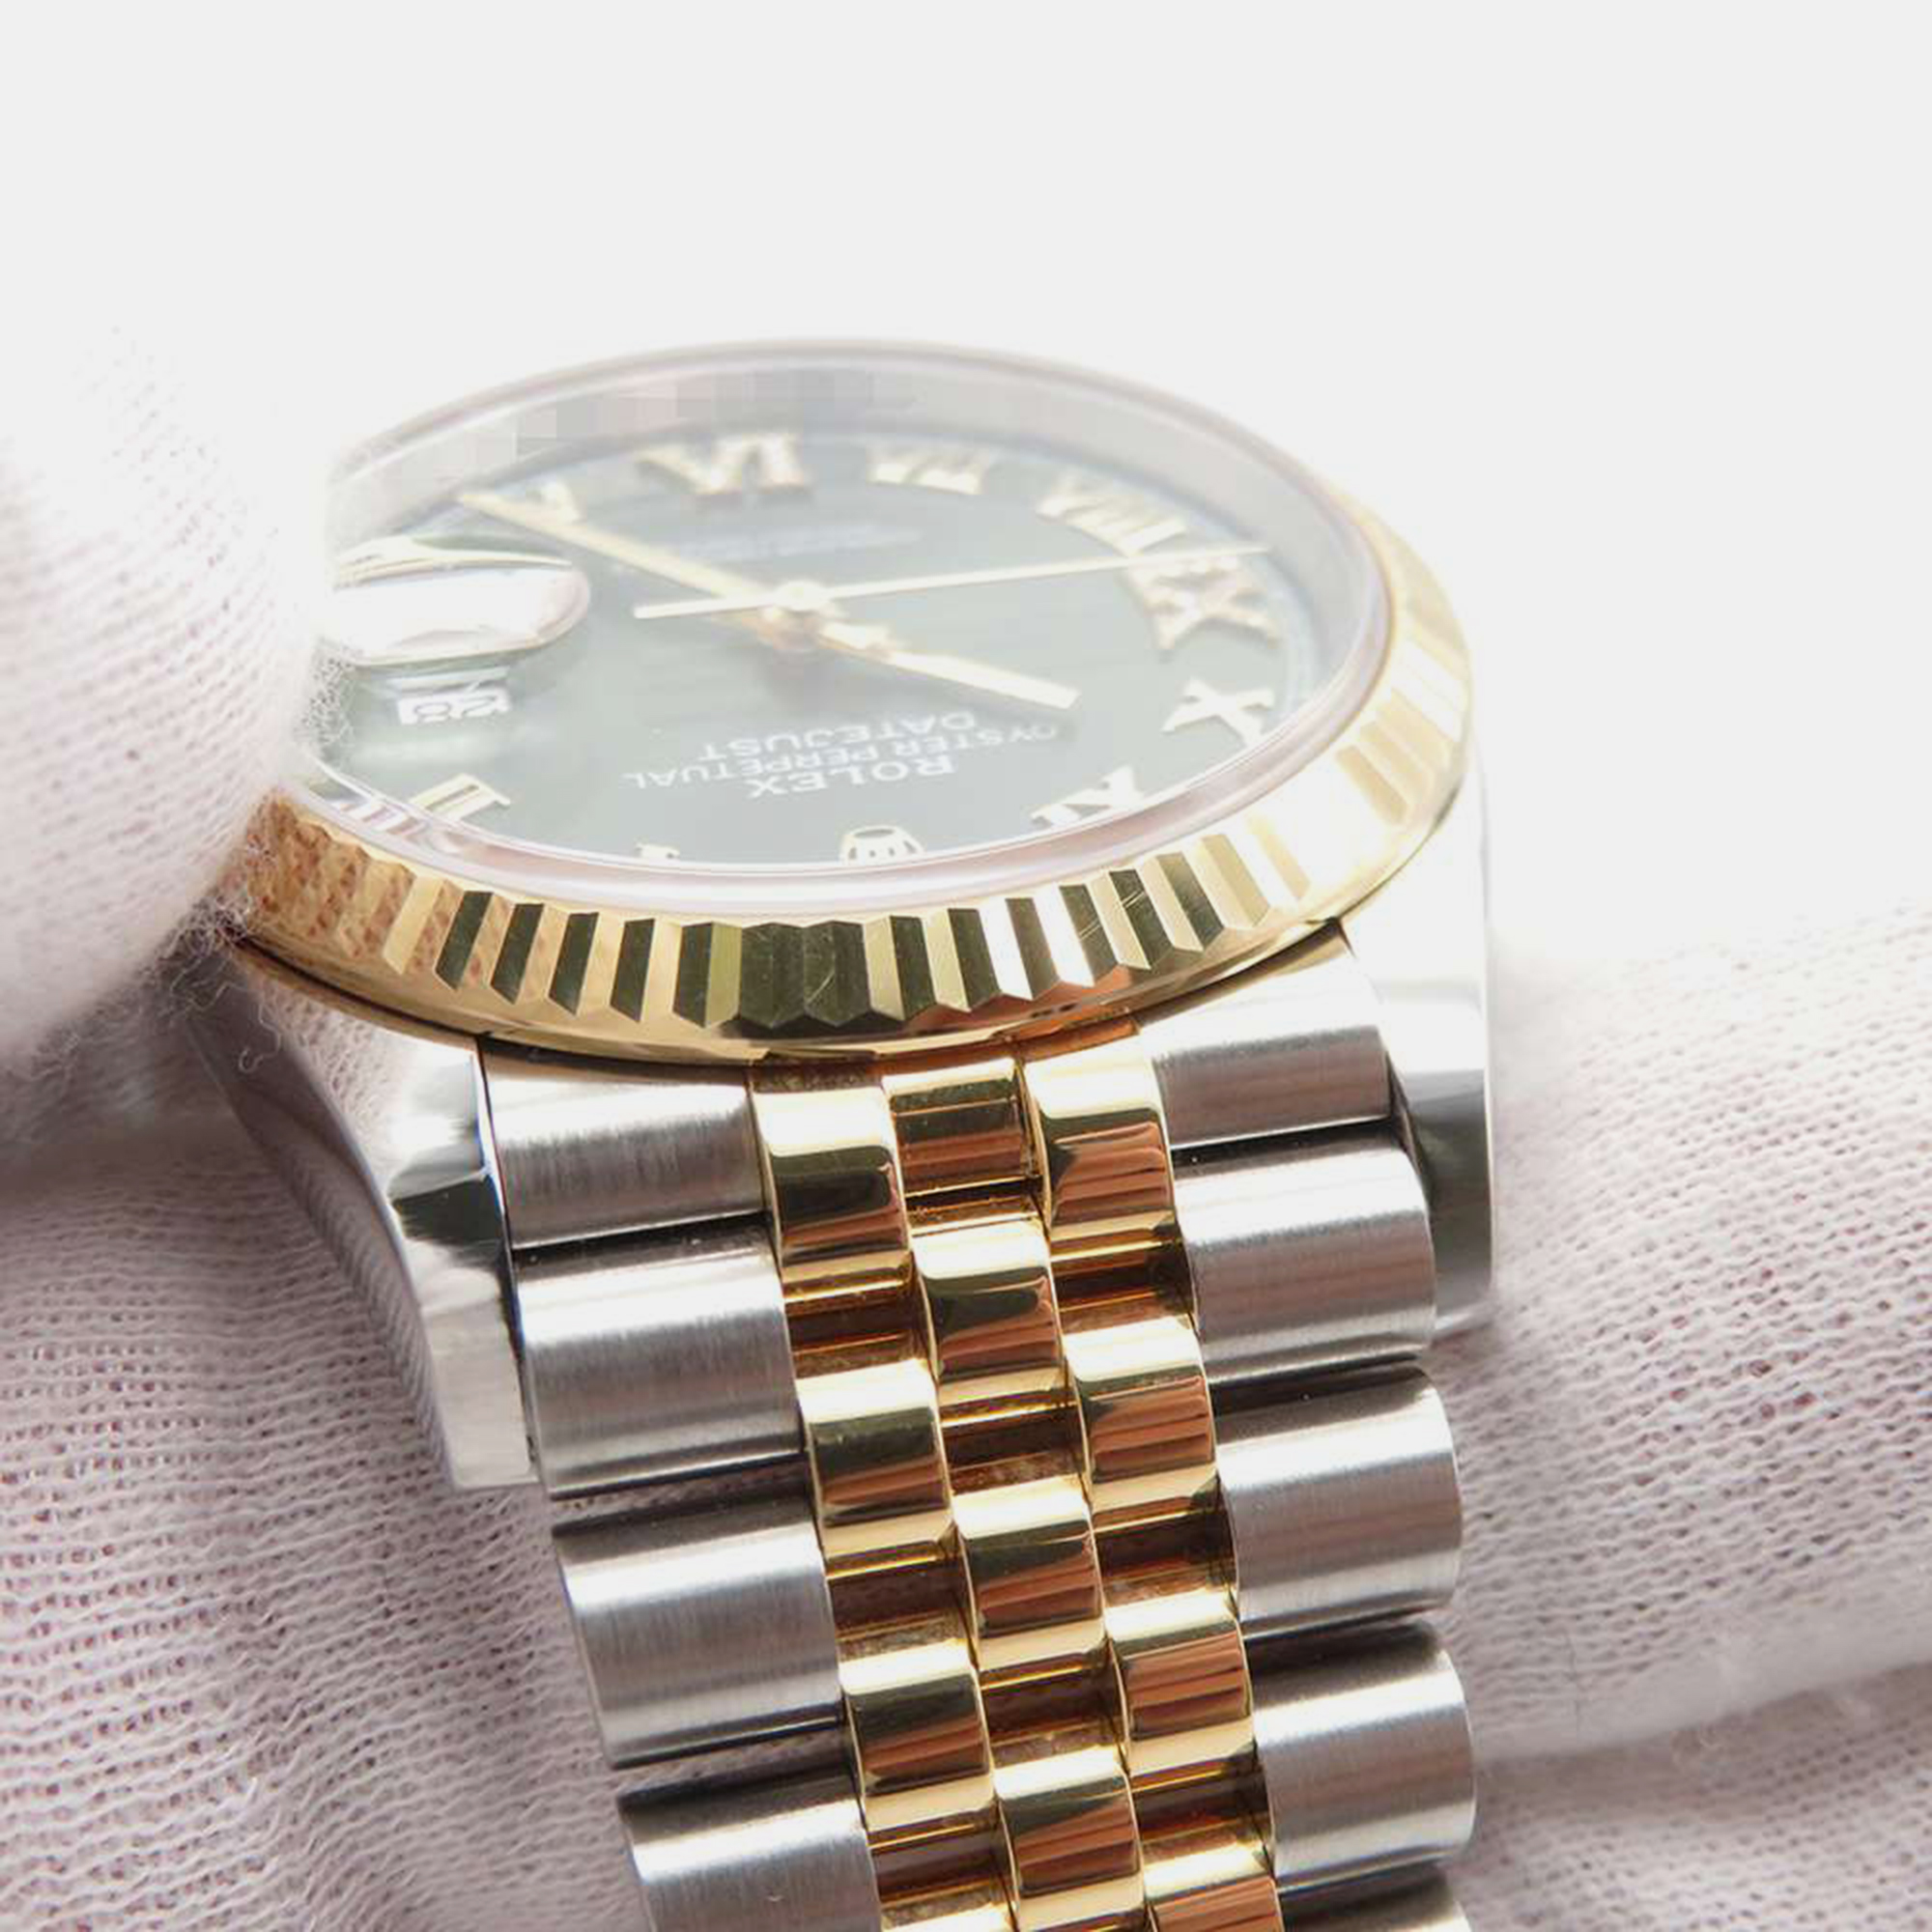 Rolex Green 18k Yellow Gold And Stainless Steel Datejust 126233 Automatic Men's Wristwatch 36 Mm